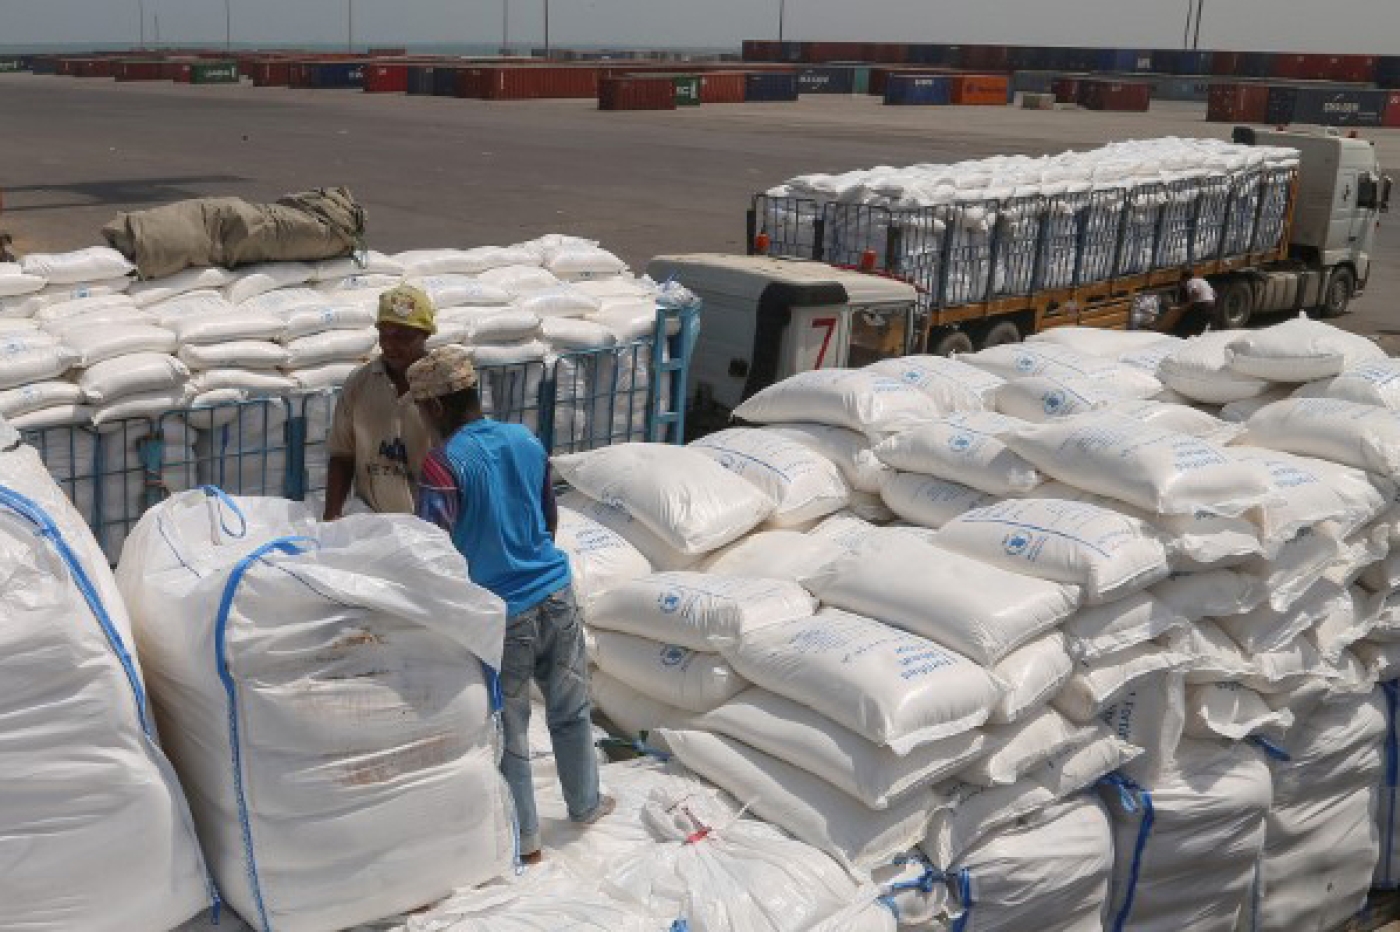 The World Food Programme tries to feed 13 million people each month in Yemen